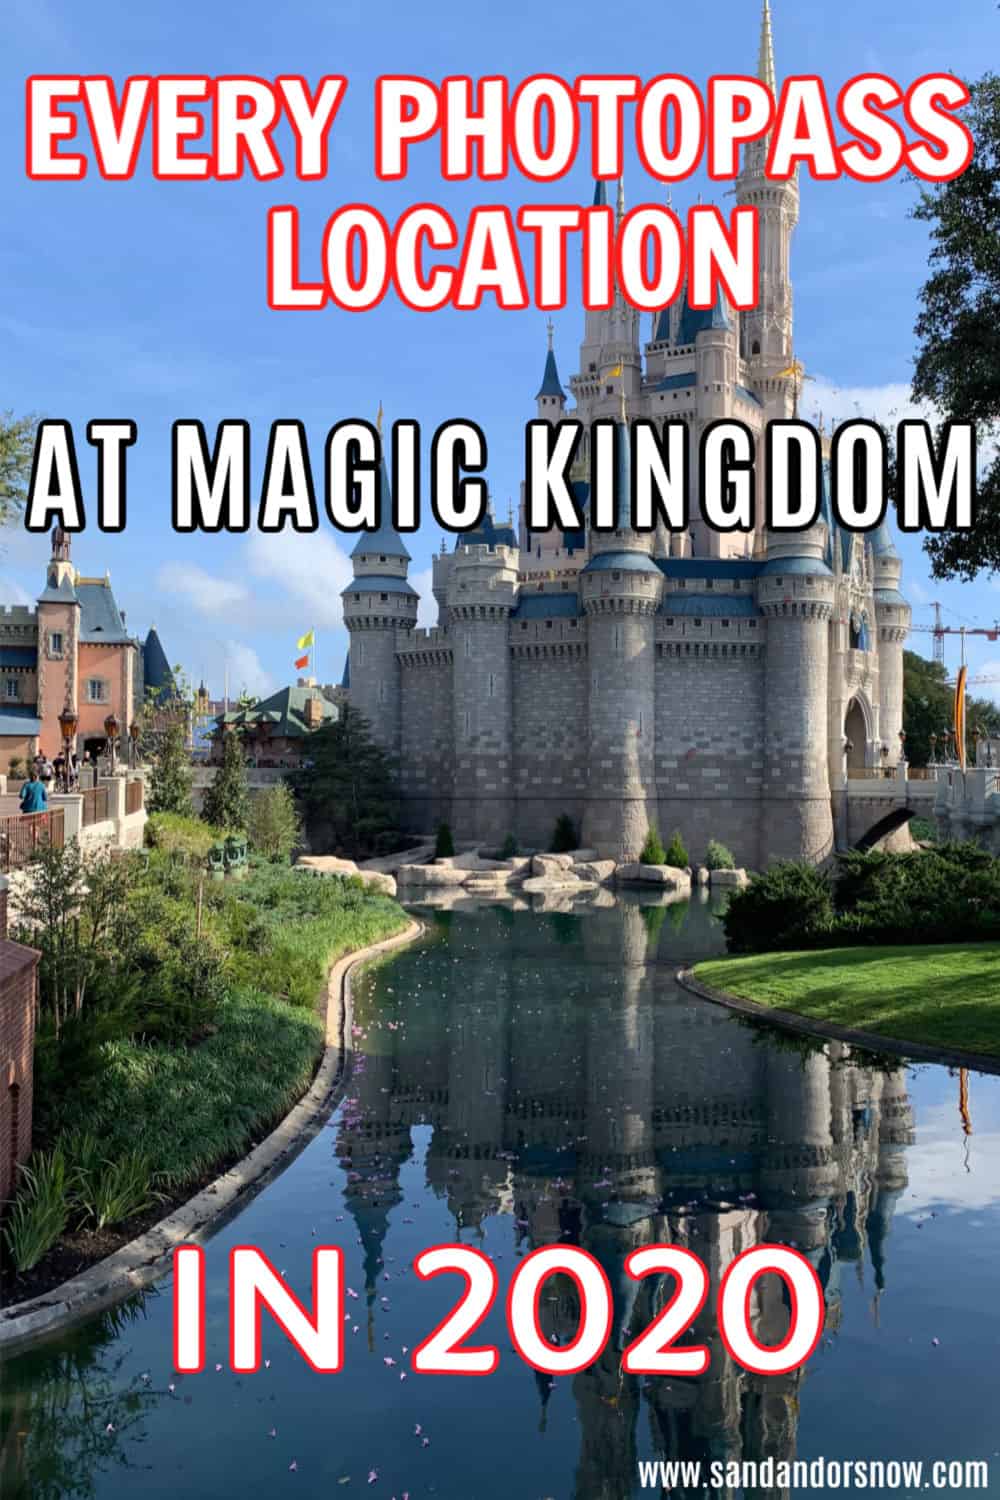 Are you ready to take ALL the Photopass photos on your next trip to Walt disney World? From locations to characters to magic shots, here's a complete list of every Magic Kingdom Photopass locations for 2020! #Disney #DisneyWorld #WDW #Photopass #DisneyPlanning #FamilyTravel #Florida #Orlando #Disneytips